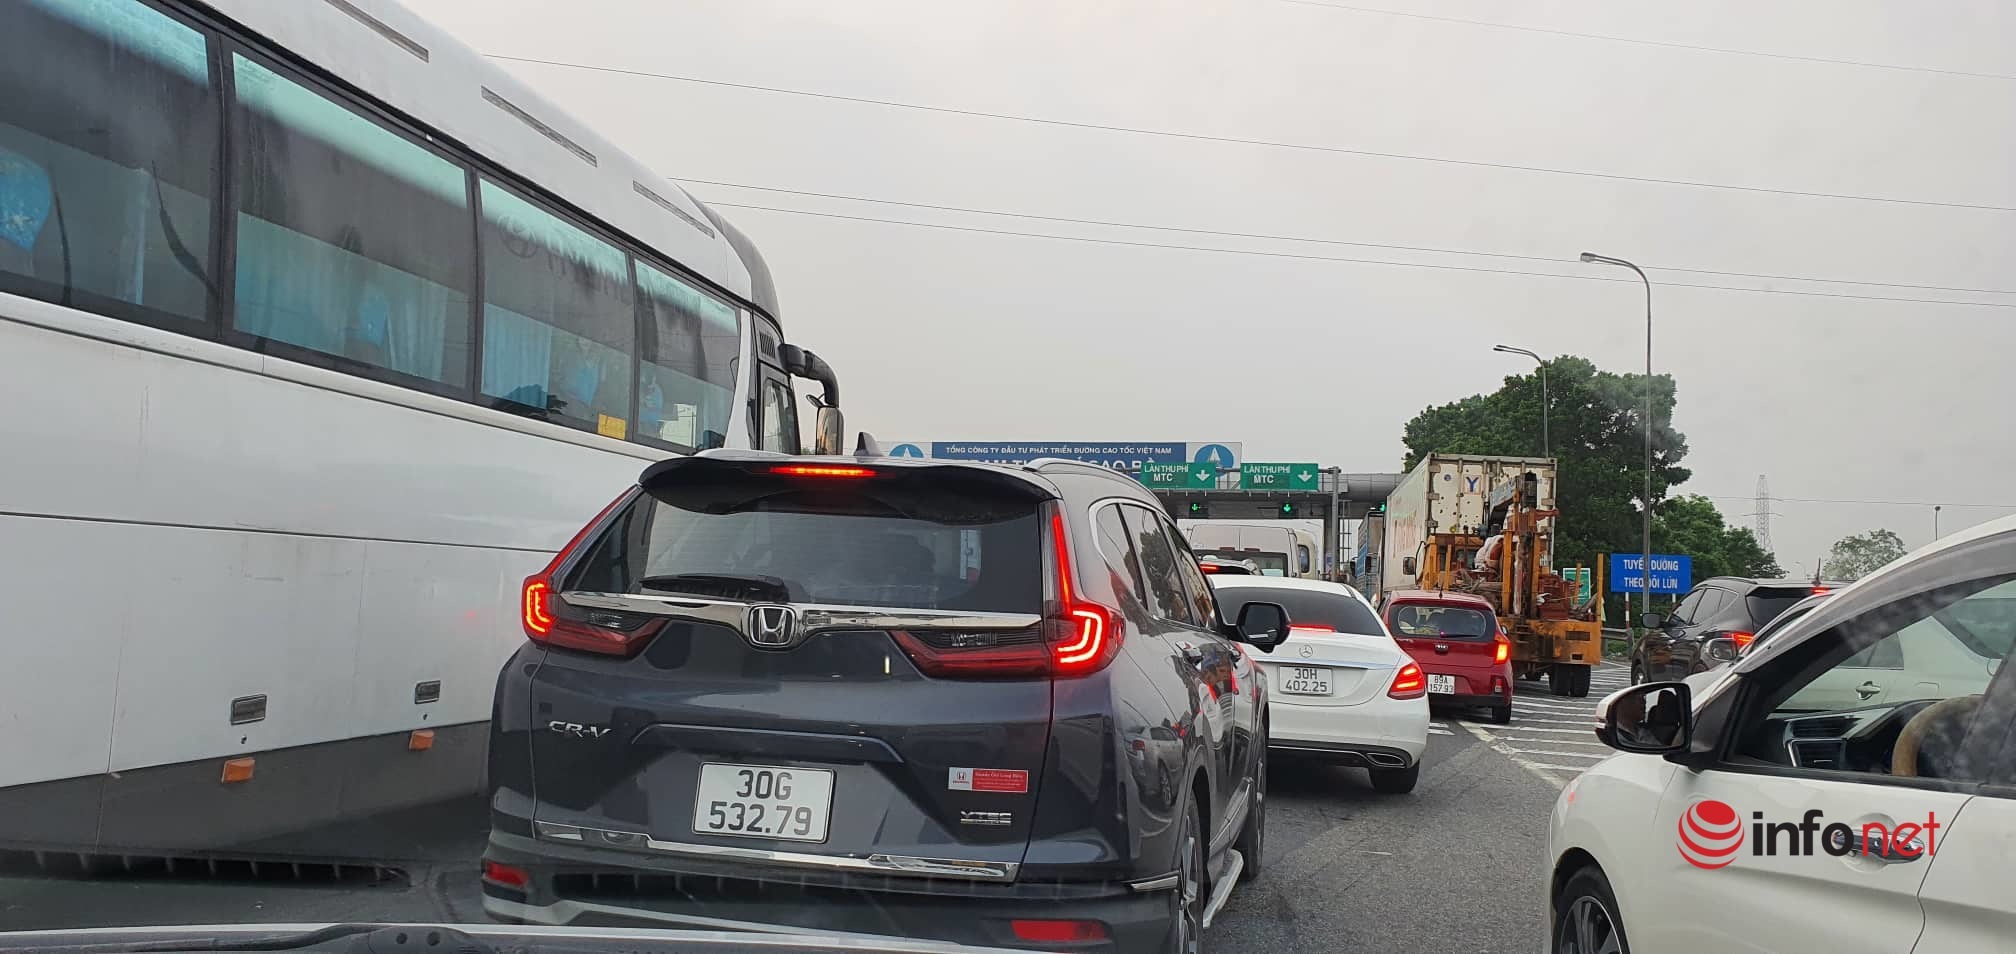 Traffic on the first holiday April 30: National Highway 1A is partially congested, waiting vehicles are extended by one kilometer